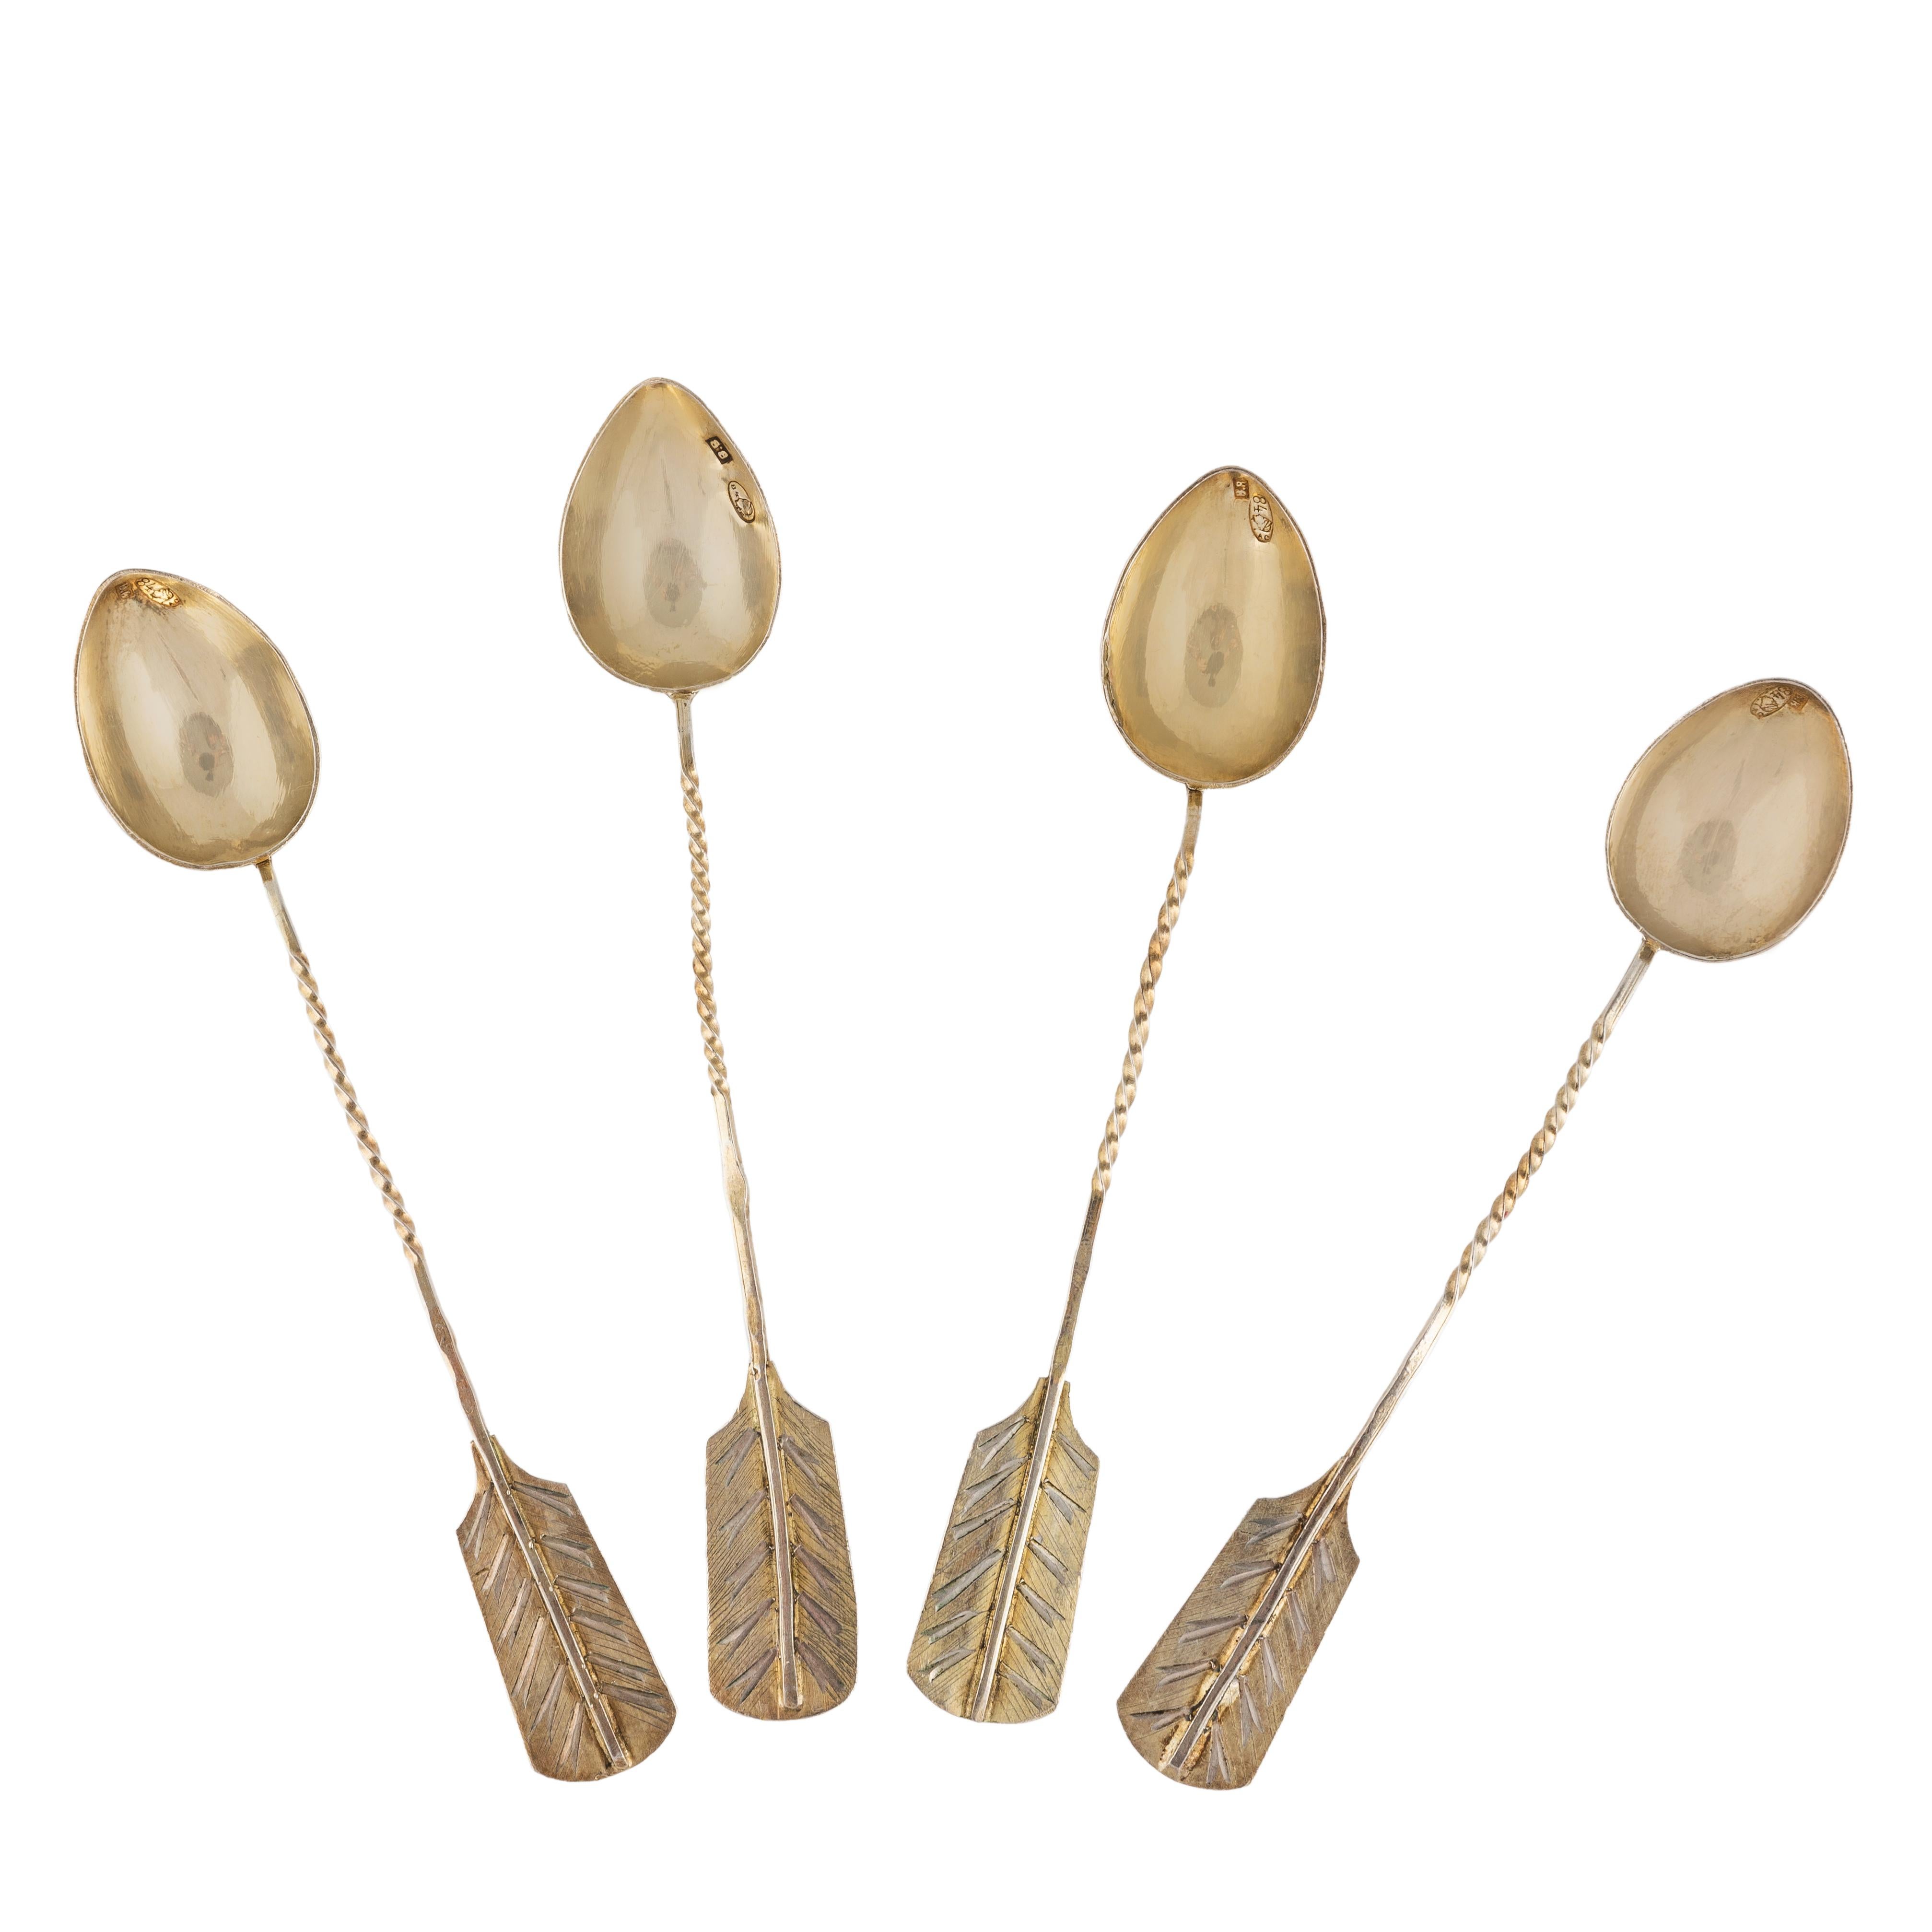 A set of four delightful Russian silver-gilt or vermeil demi-tasse coffee spoons, the handles in the shape of arrow feathers, with twisted stems and engraved exterior bowls typical of that period. The silver is gilded throughout with the original